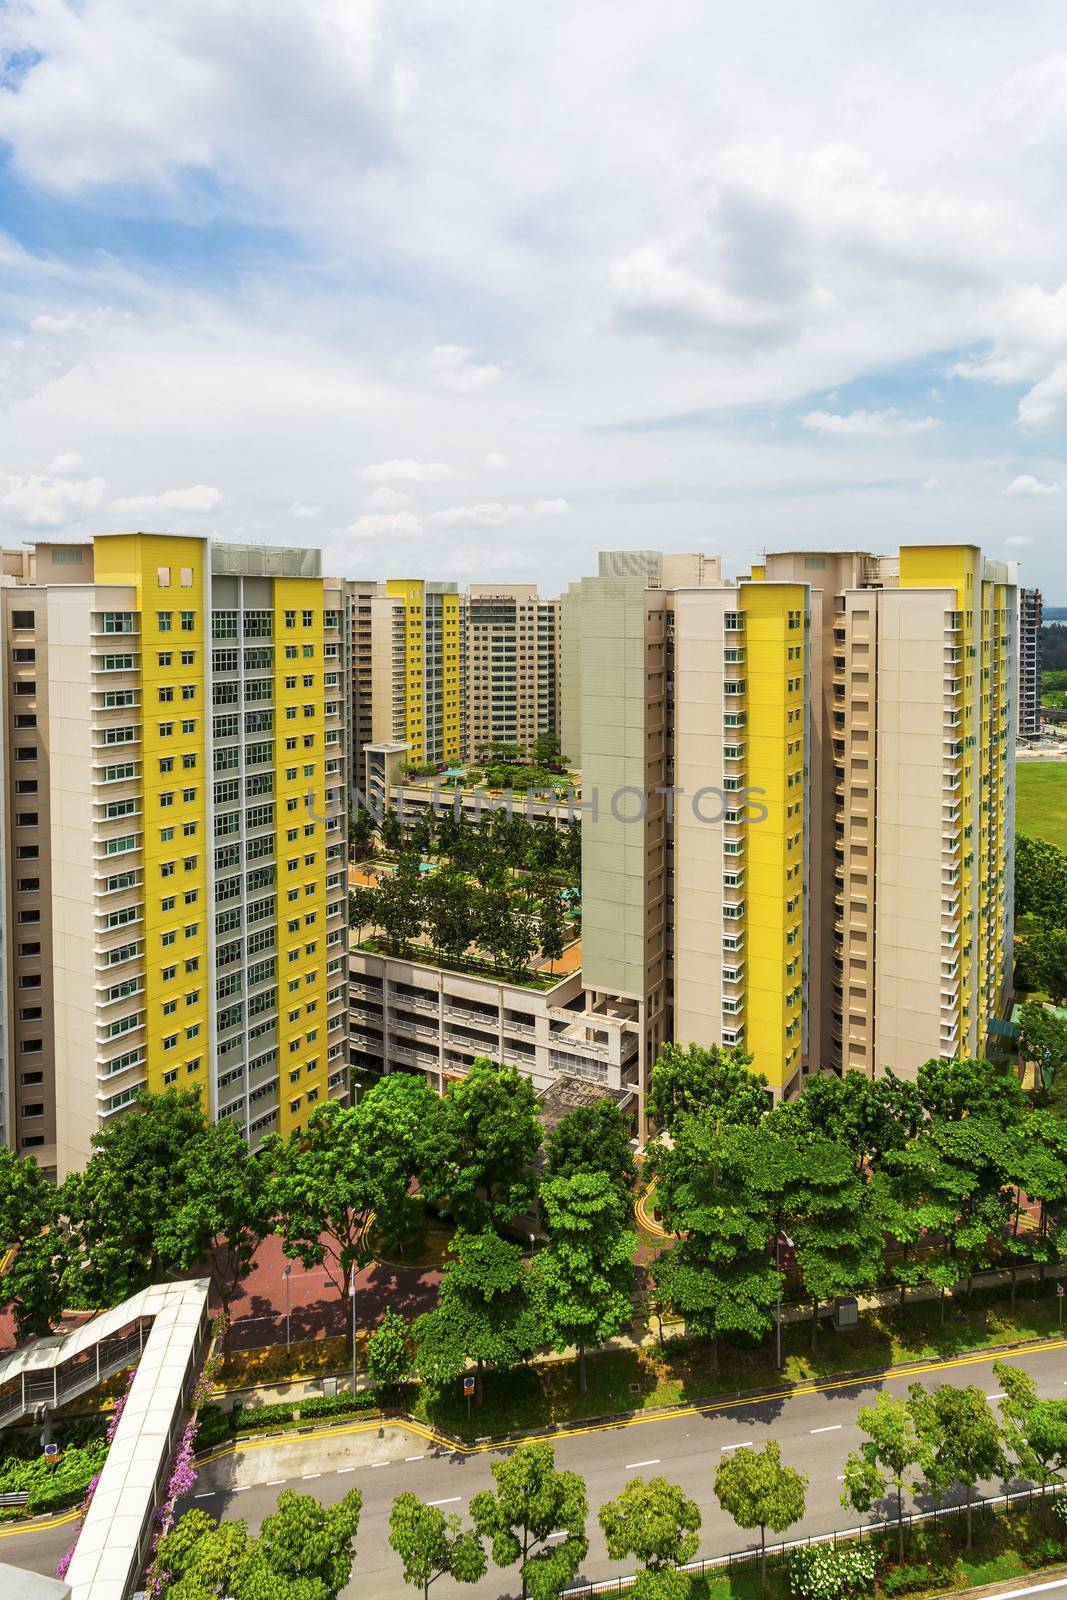 A vertical shot of a new colorful neighborhood estate among domestic garden in Singapore